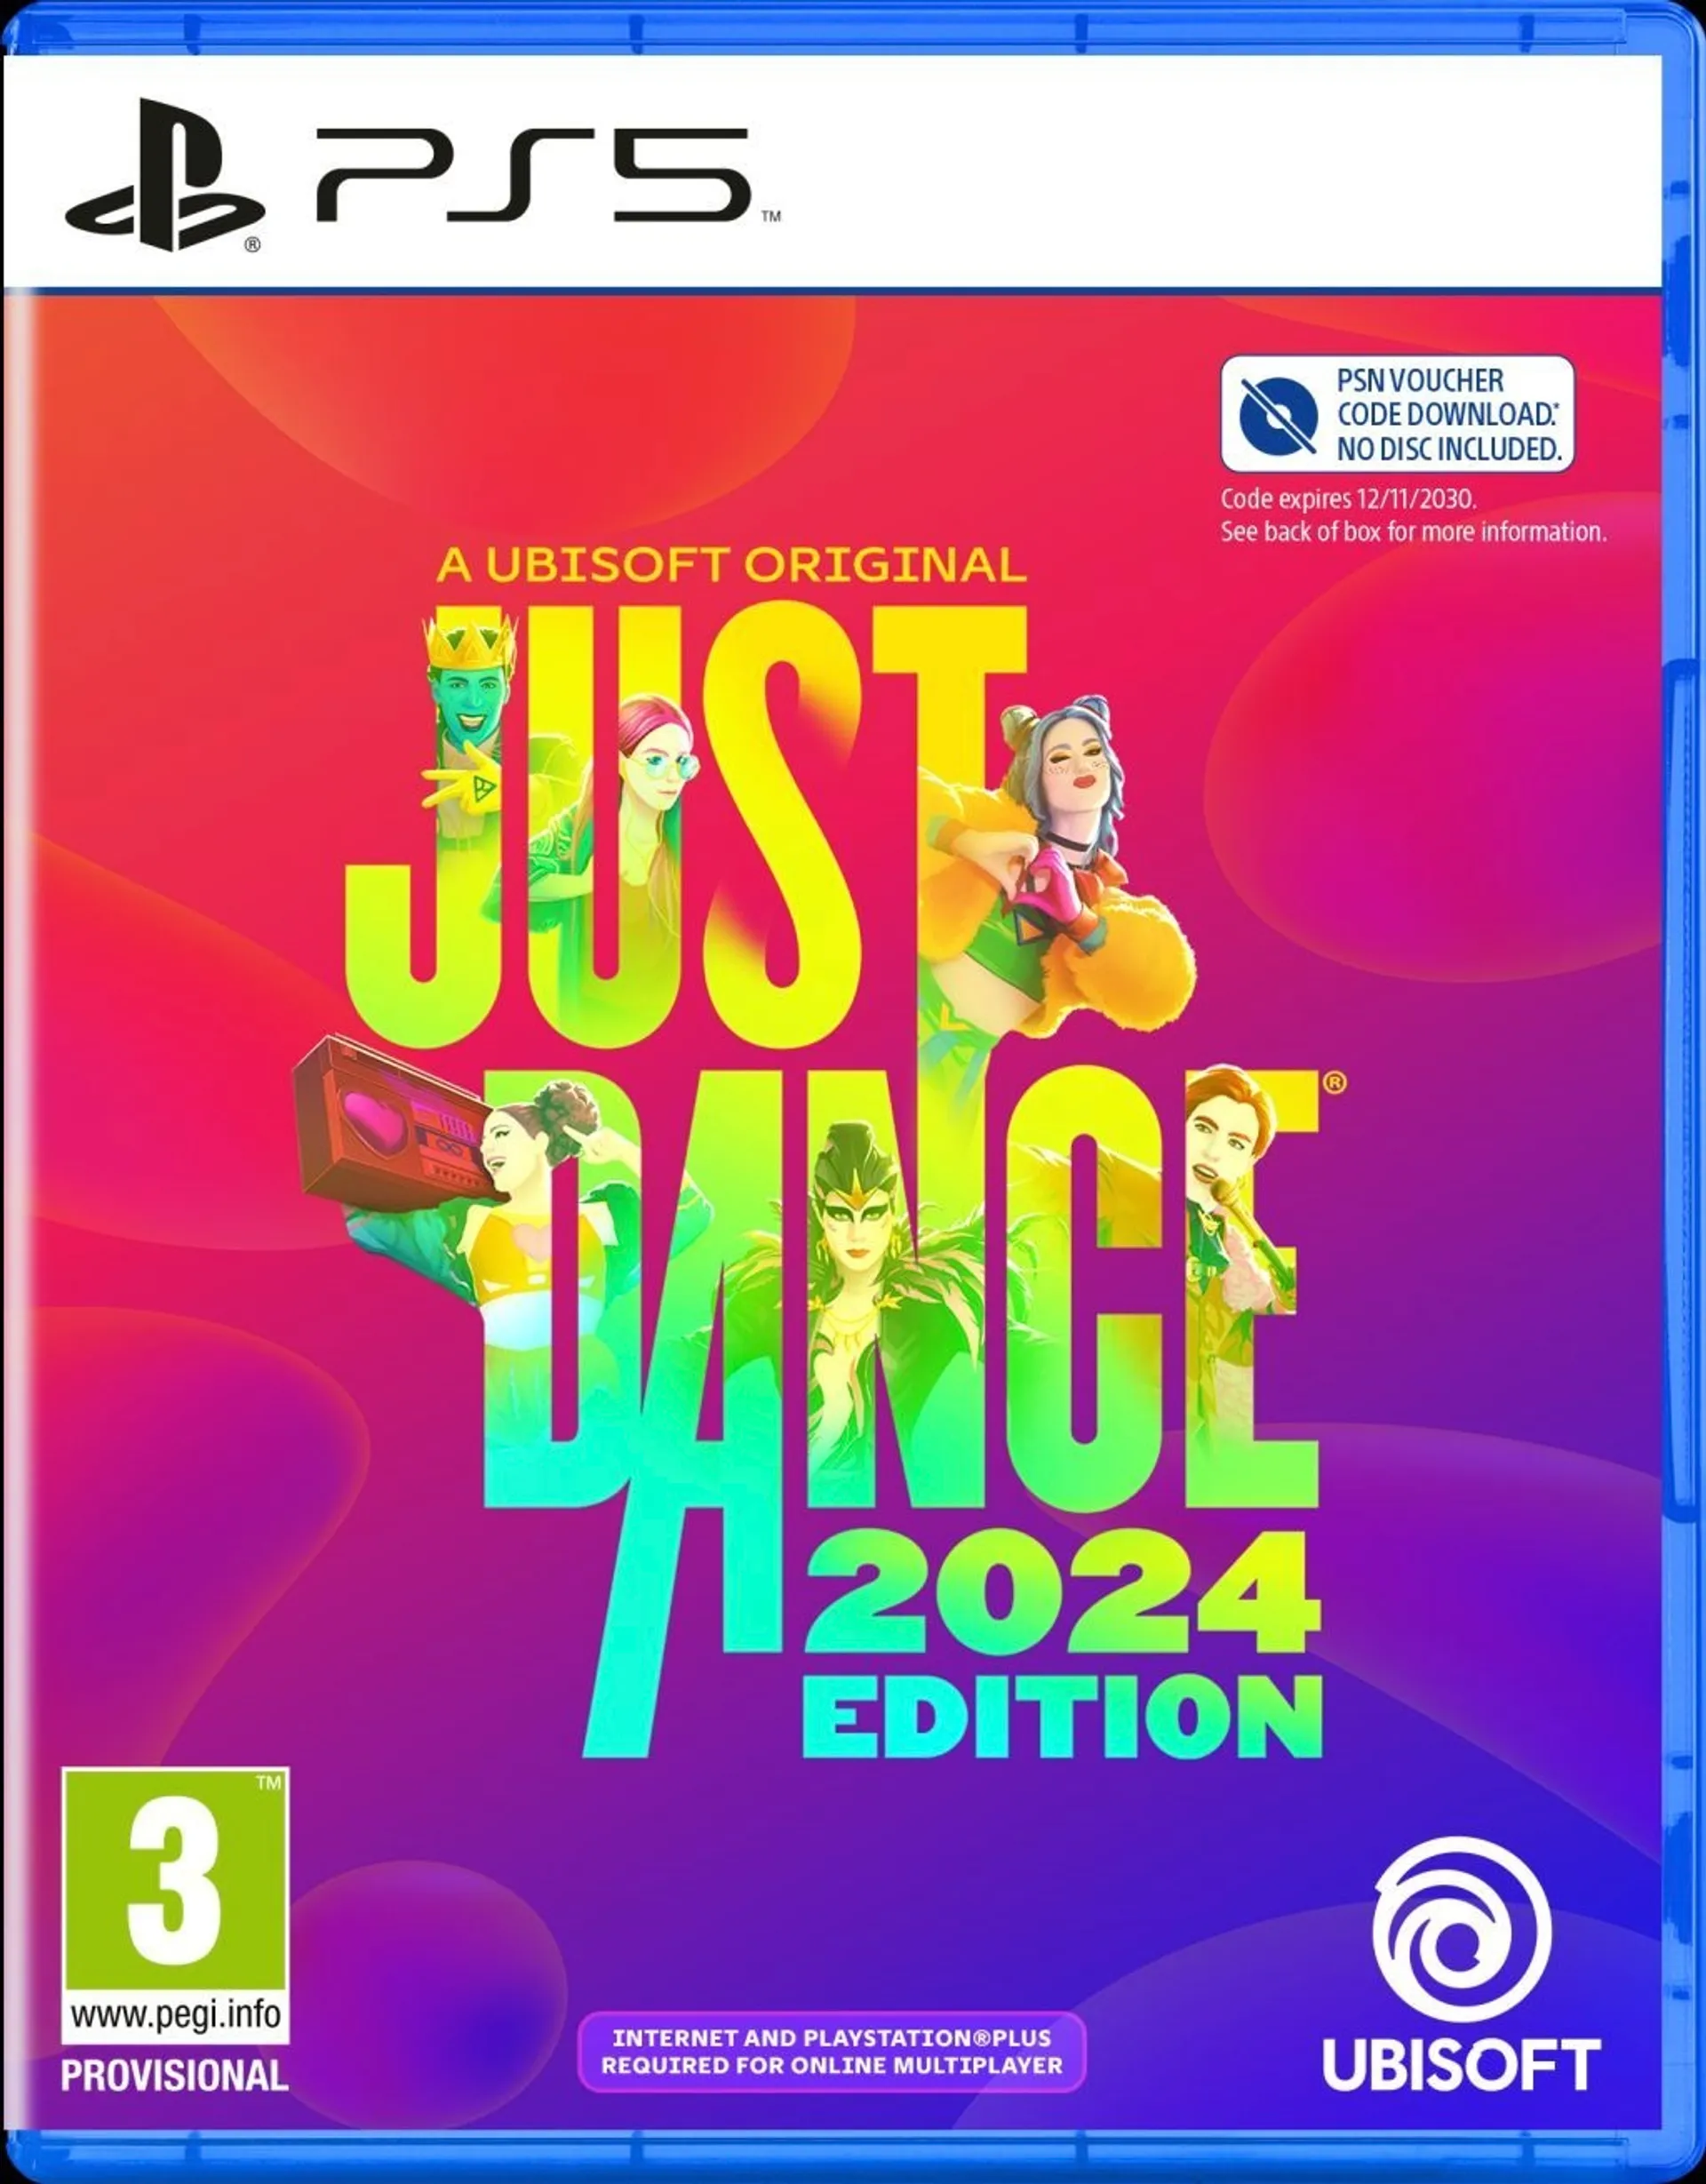 PlayStation 5 Just Dance 2024 Edition